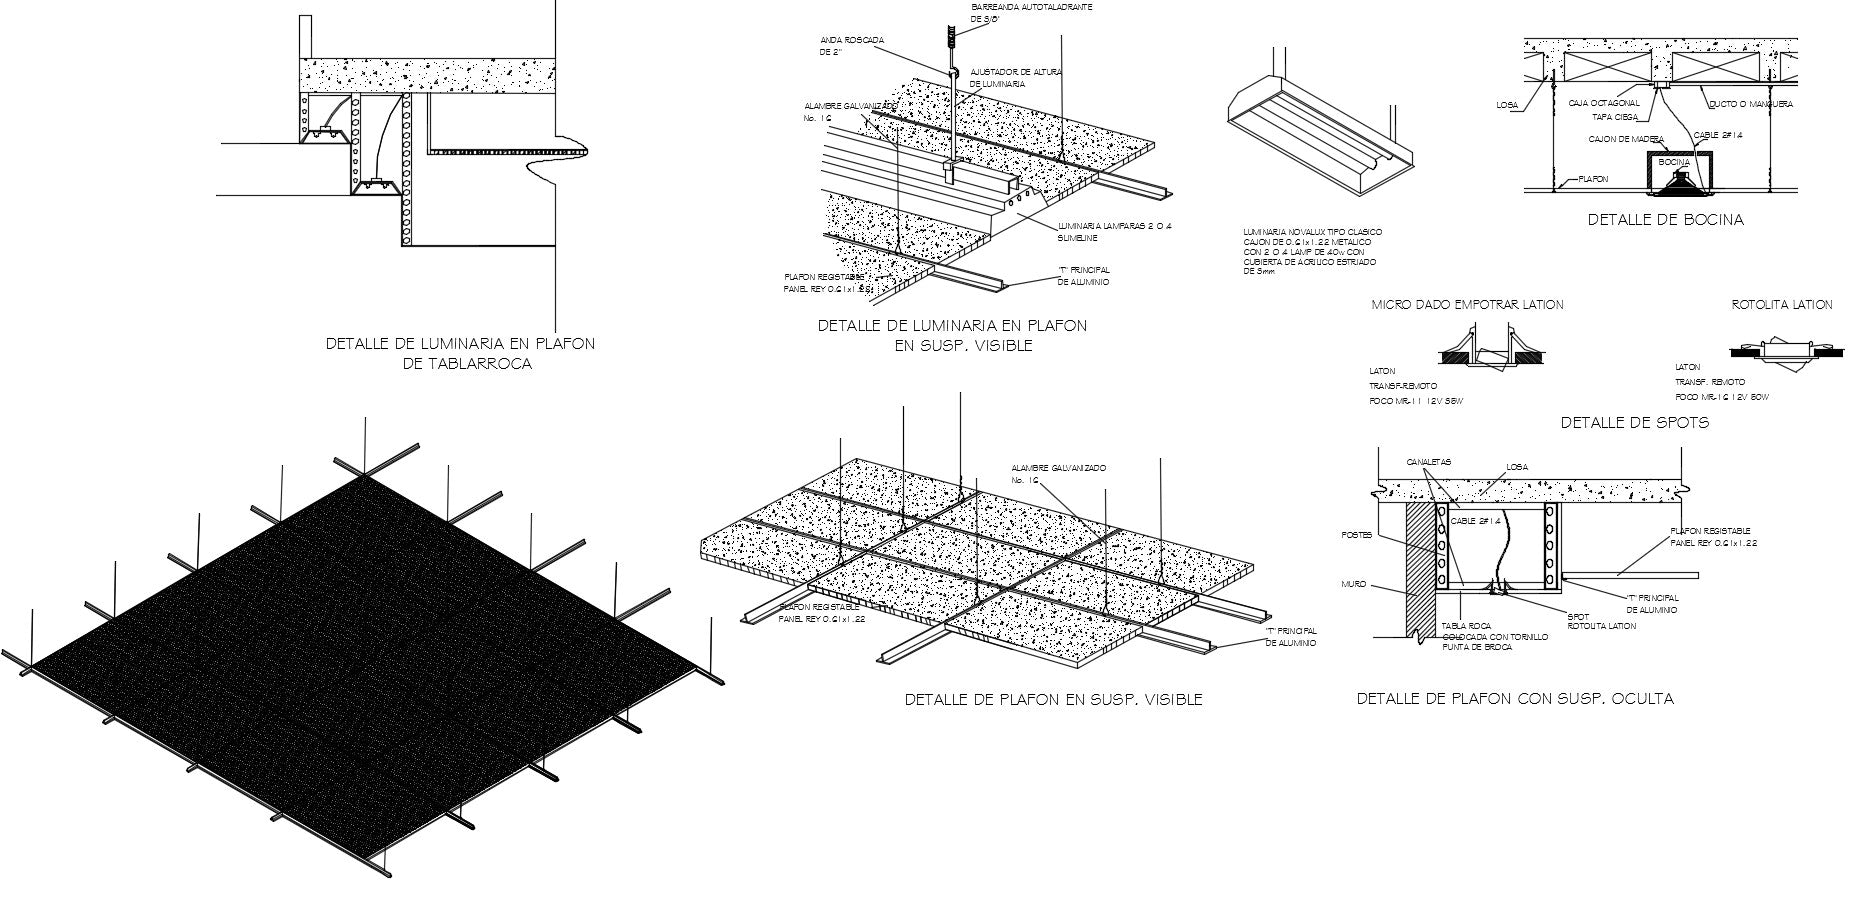 Ceiling detail sections drawing dwg files include plan, elevations and sectional detail of suspended ceilings in autocad dwg files